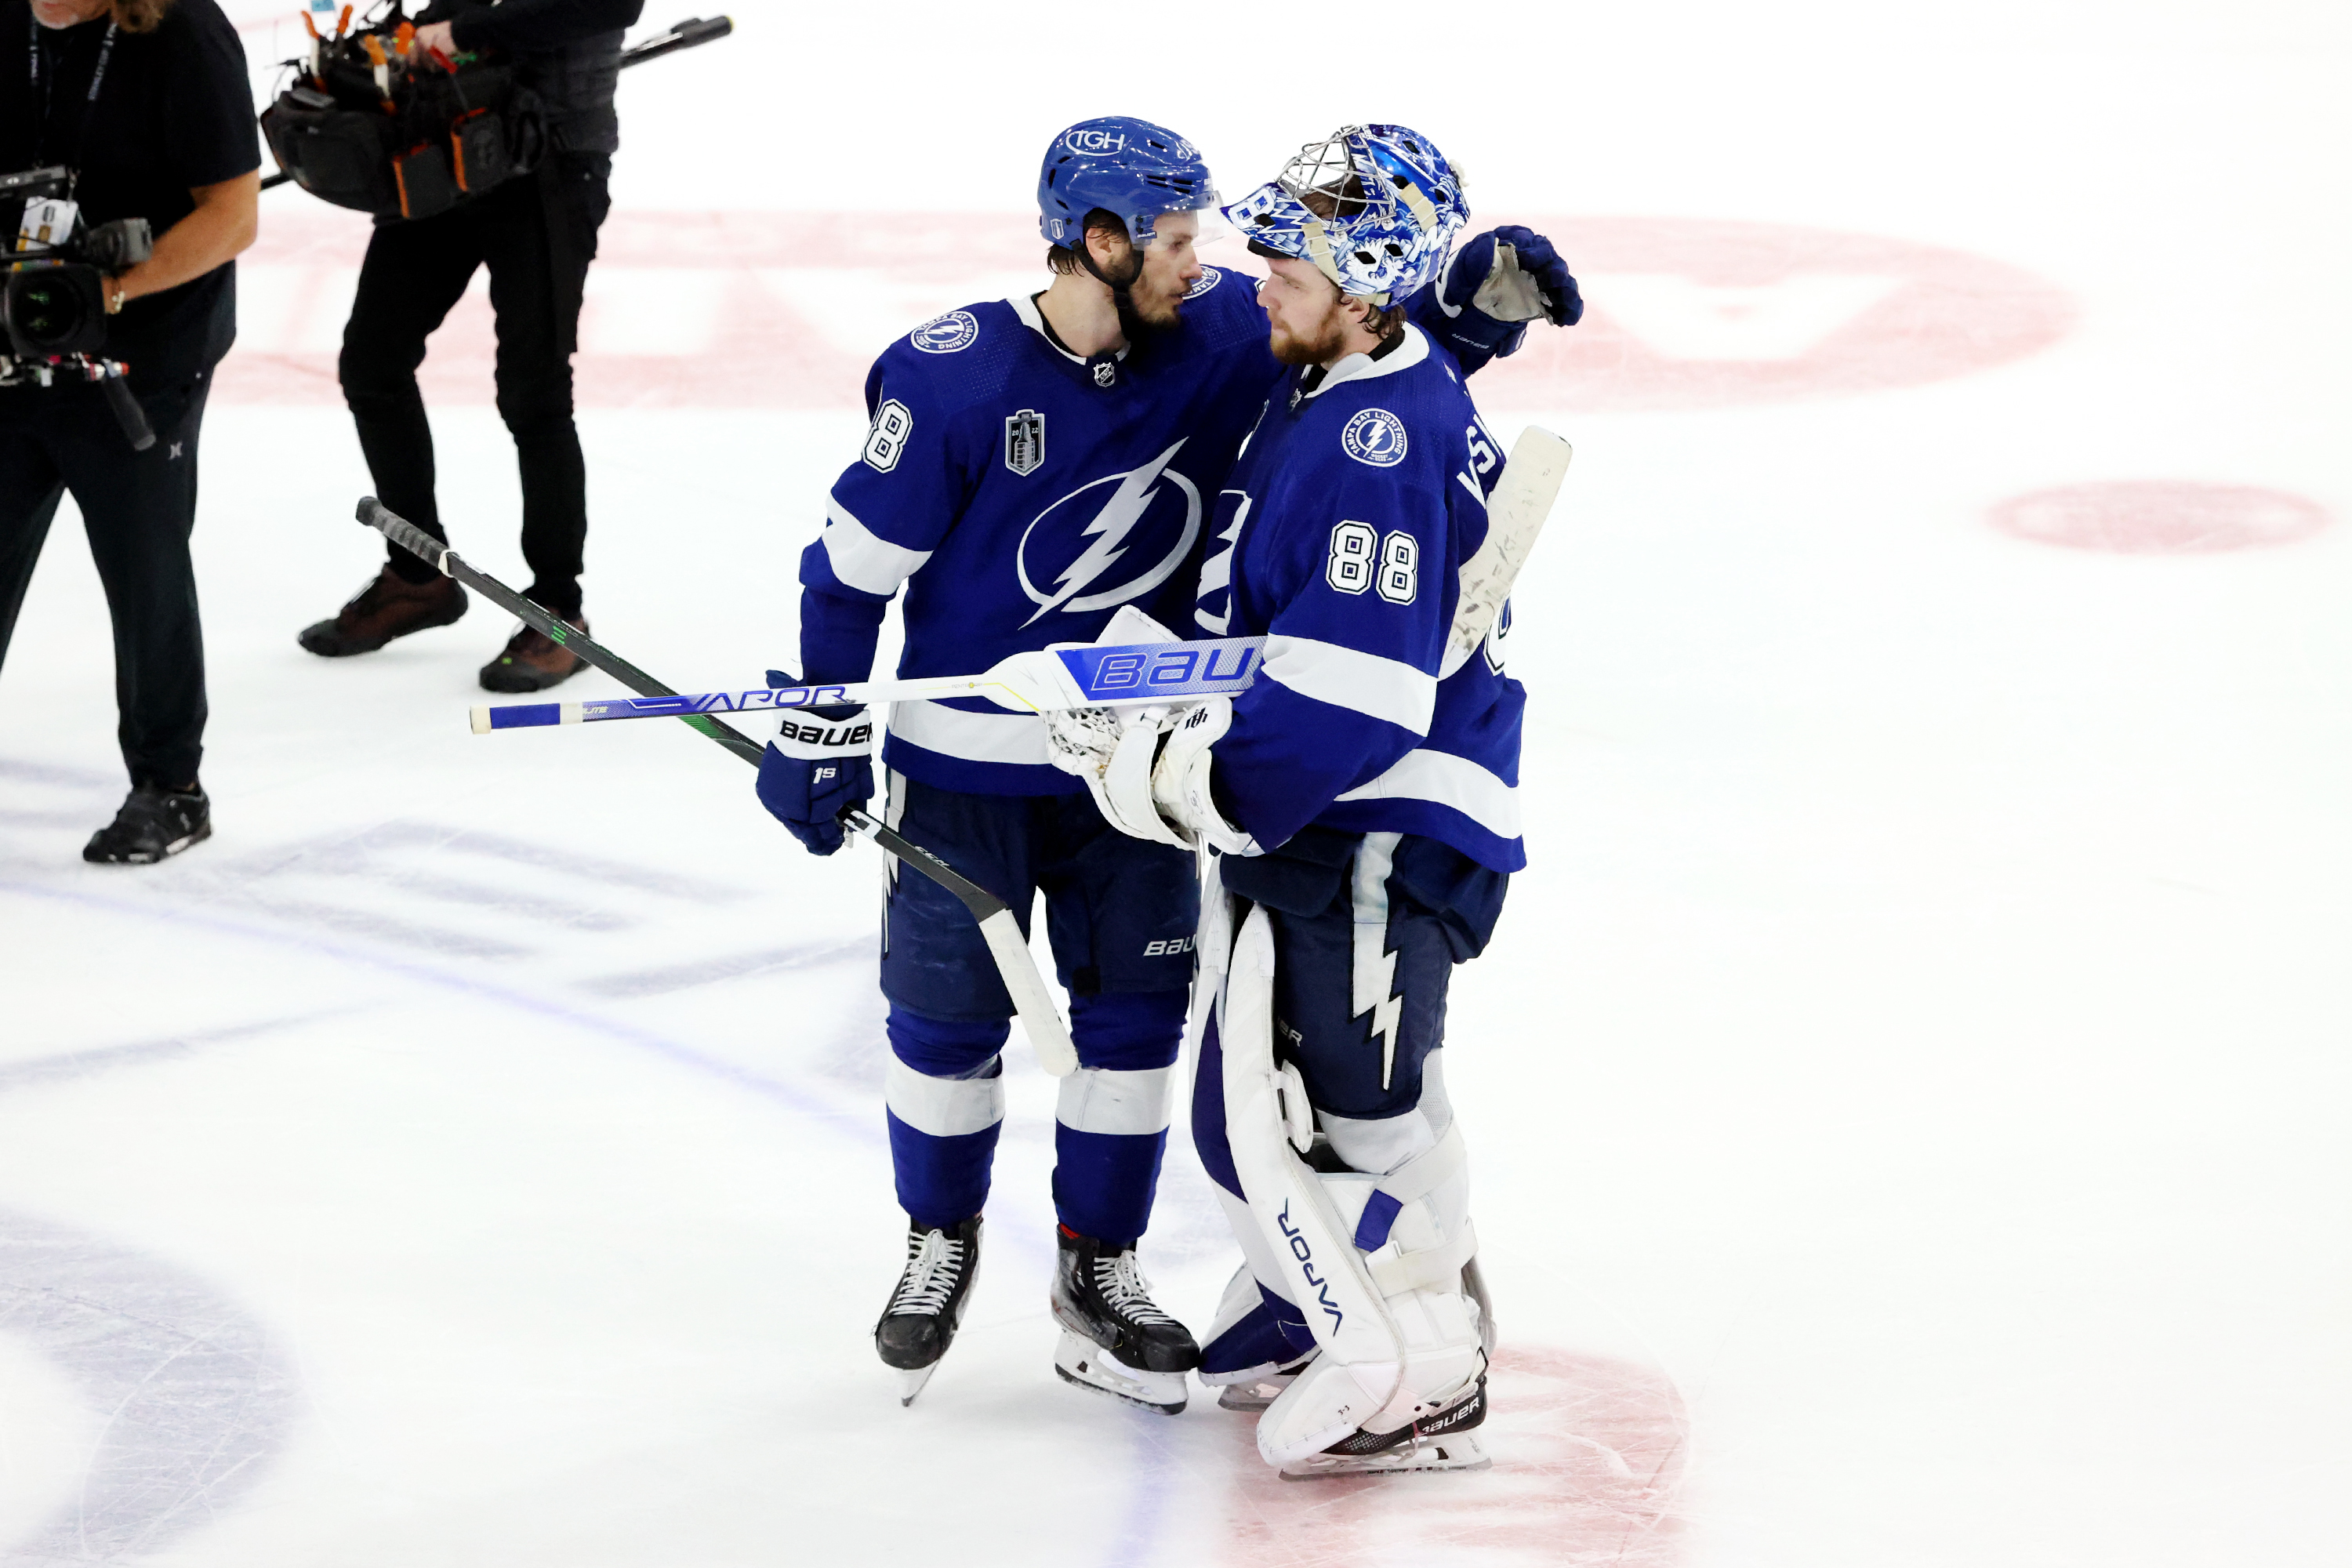 Lightning's special season ends in Game 6 of Stanley Cup final (w/video)